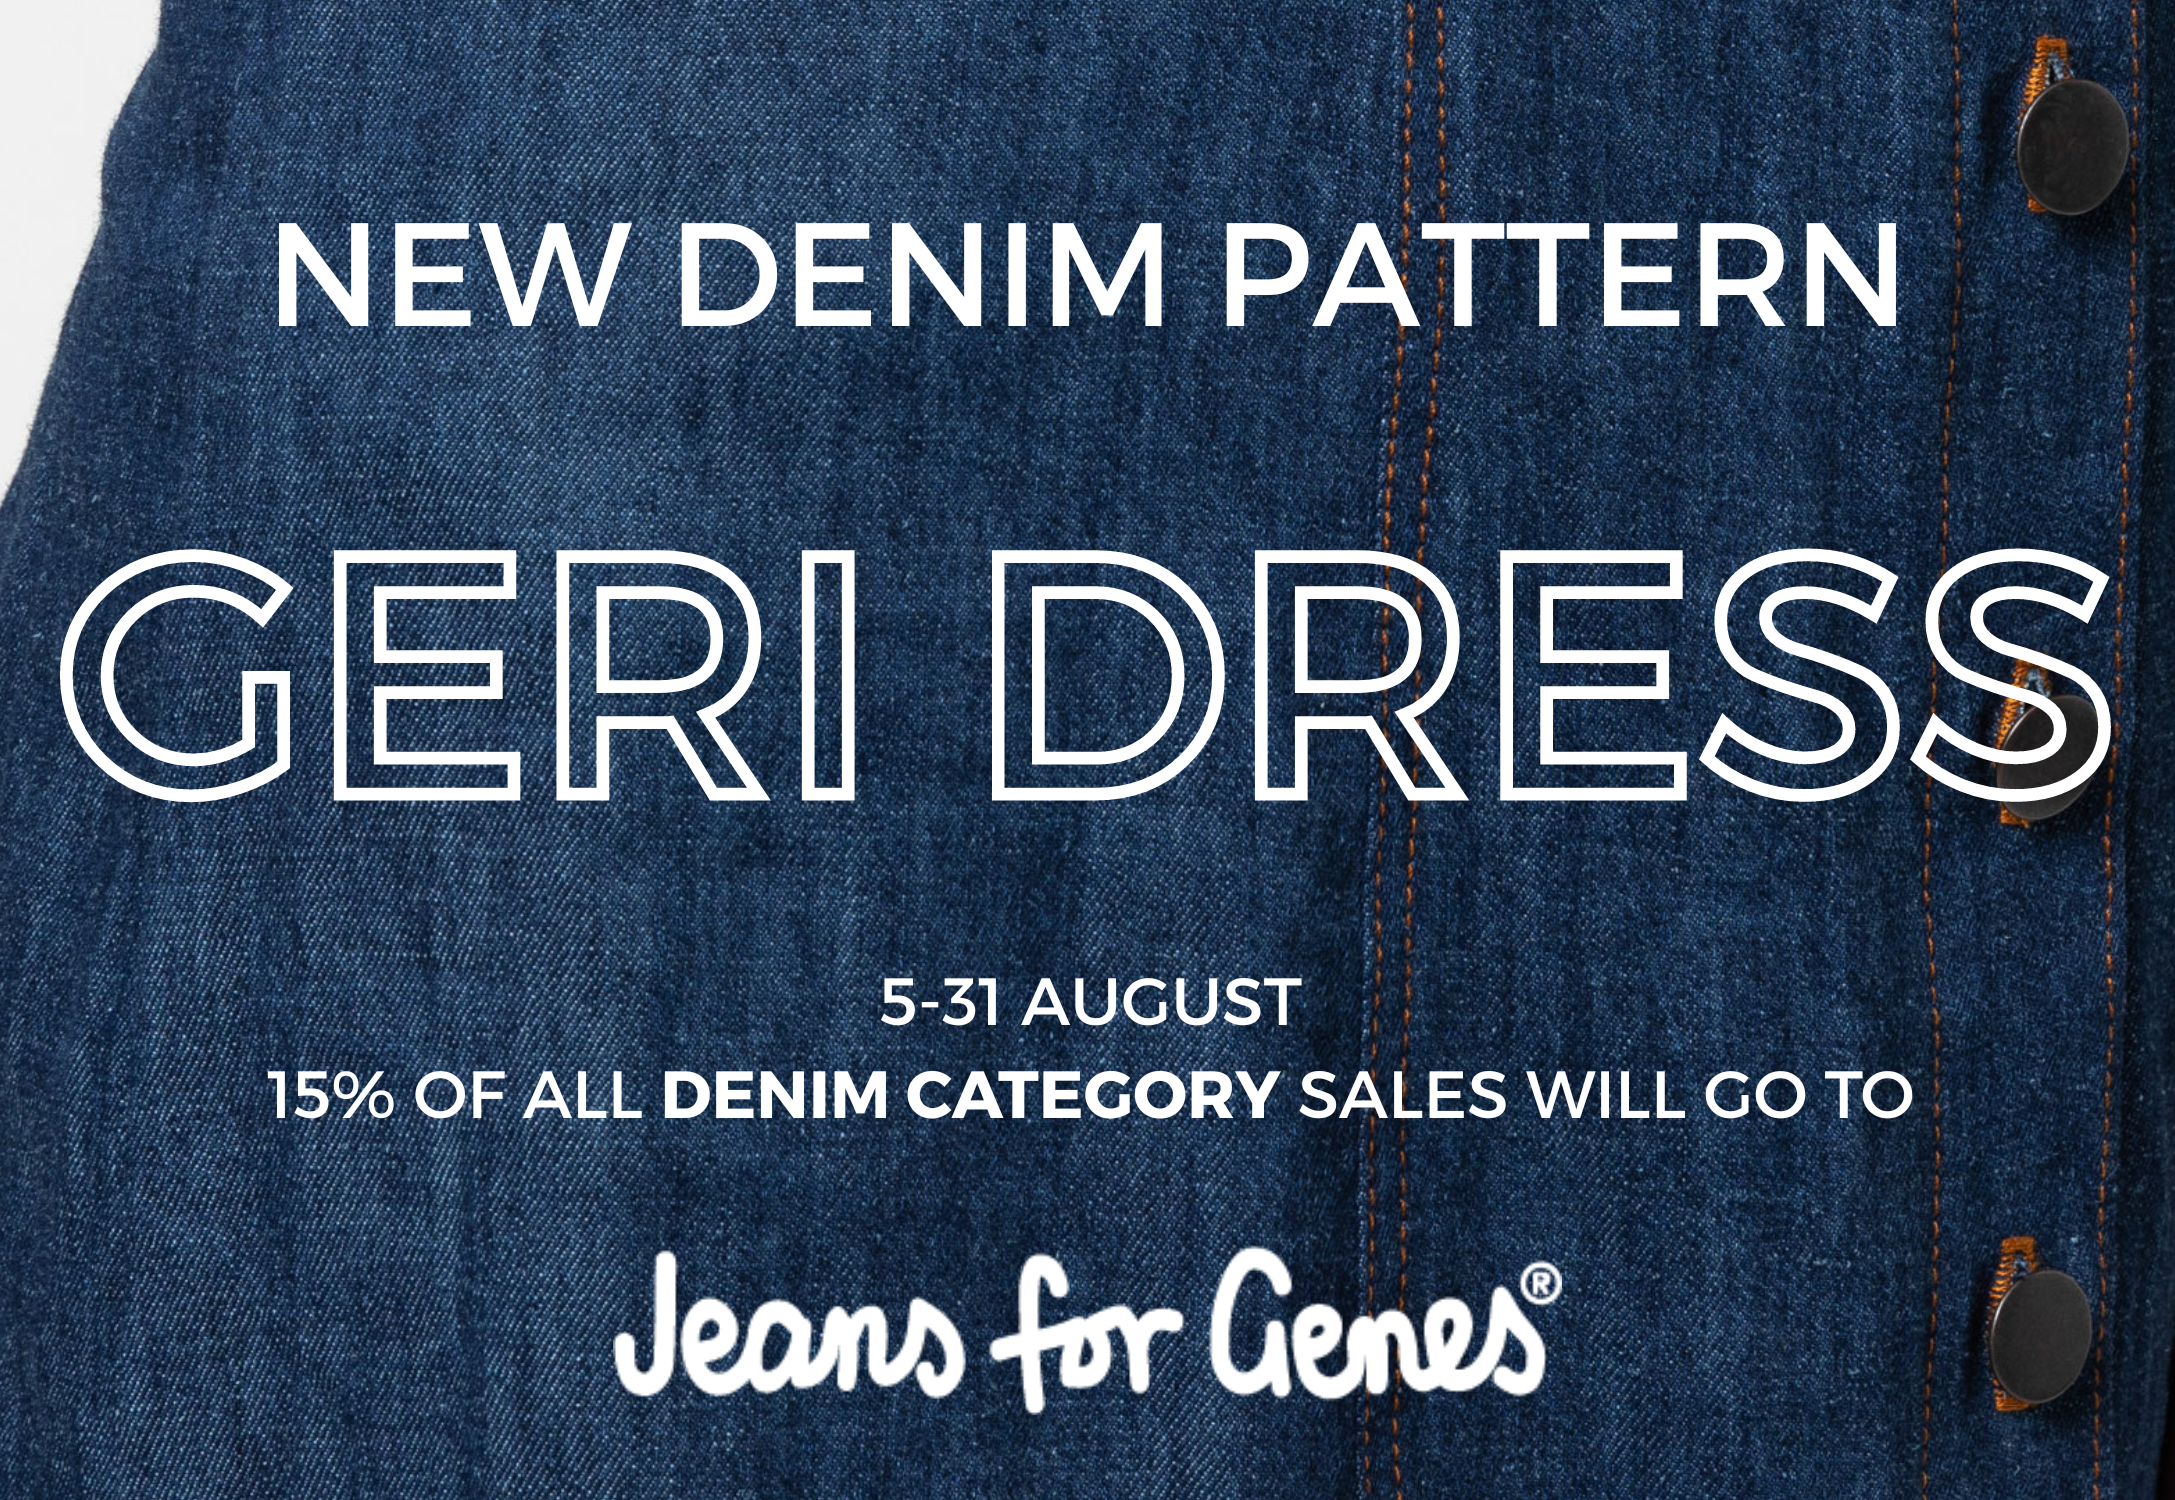 New Pattern - Geri Dress - 15% of all sales from the Denim Category will go to Jeans for Genes 5-31 August 2022